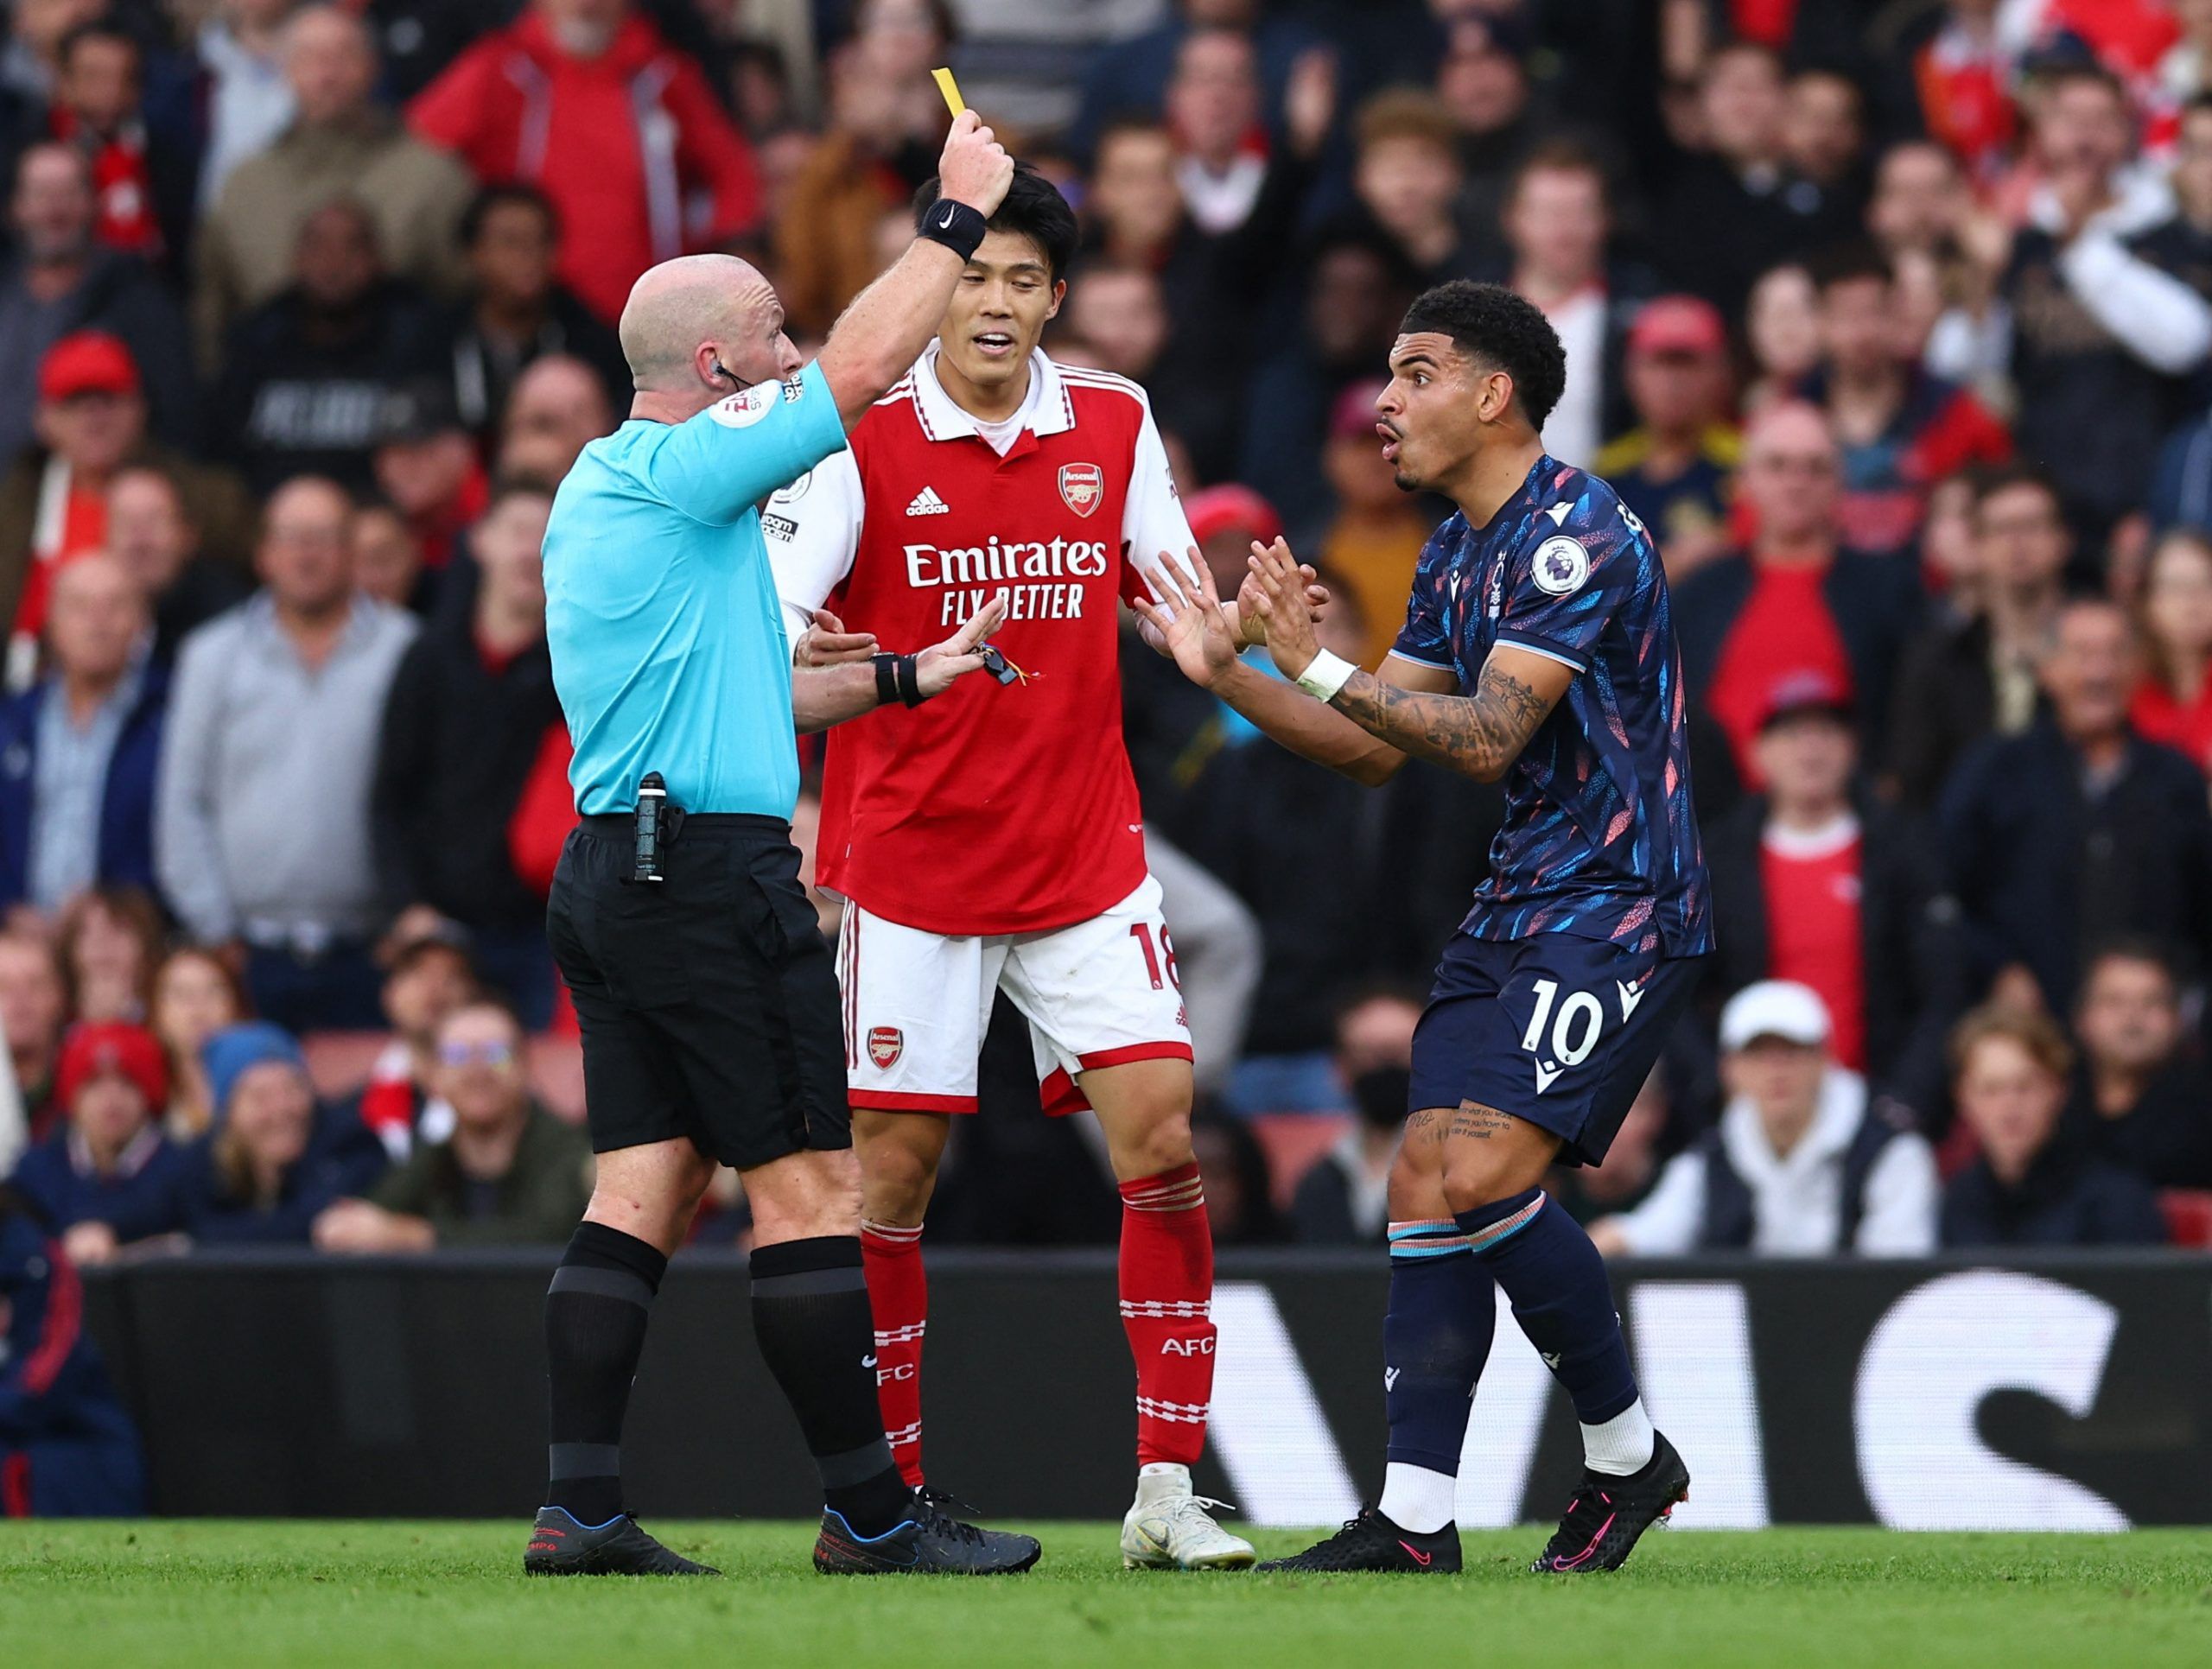 Soccer Football - Premier League - Arsenal v Nottingham Forest - Emirates Stadium, London, Britain - October 30, 2022 Nottingham Forest's Morgan Gibbs-White is shown a yellow card by referee Simon Hooper REUTERS/David Klein EDITORIAL USE ONLY. No use with unauthorized audio, video, data, fixture lists, club/league logos or 'live' services. Online in-match use limited to 75 images, no video emulation. No use in betting, games or single club /league/player publications. Please contact your accoun